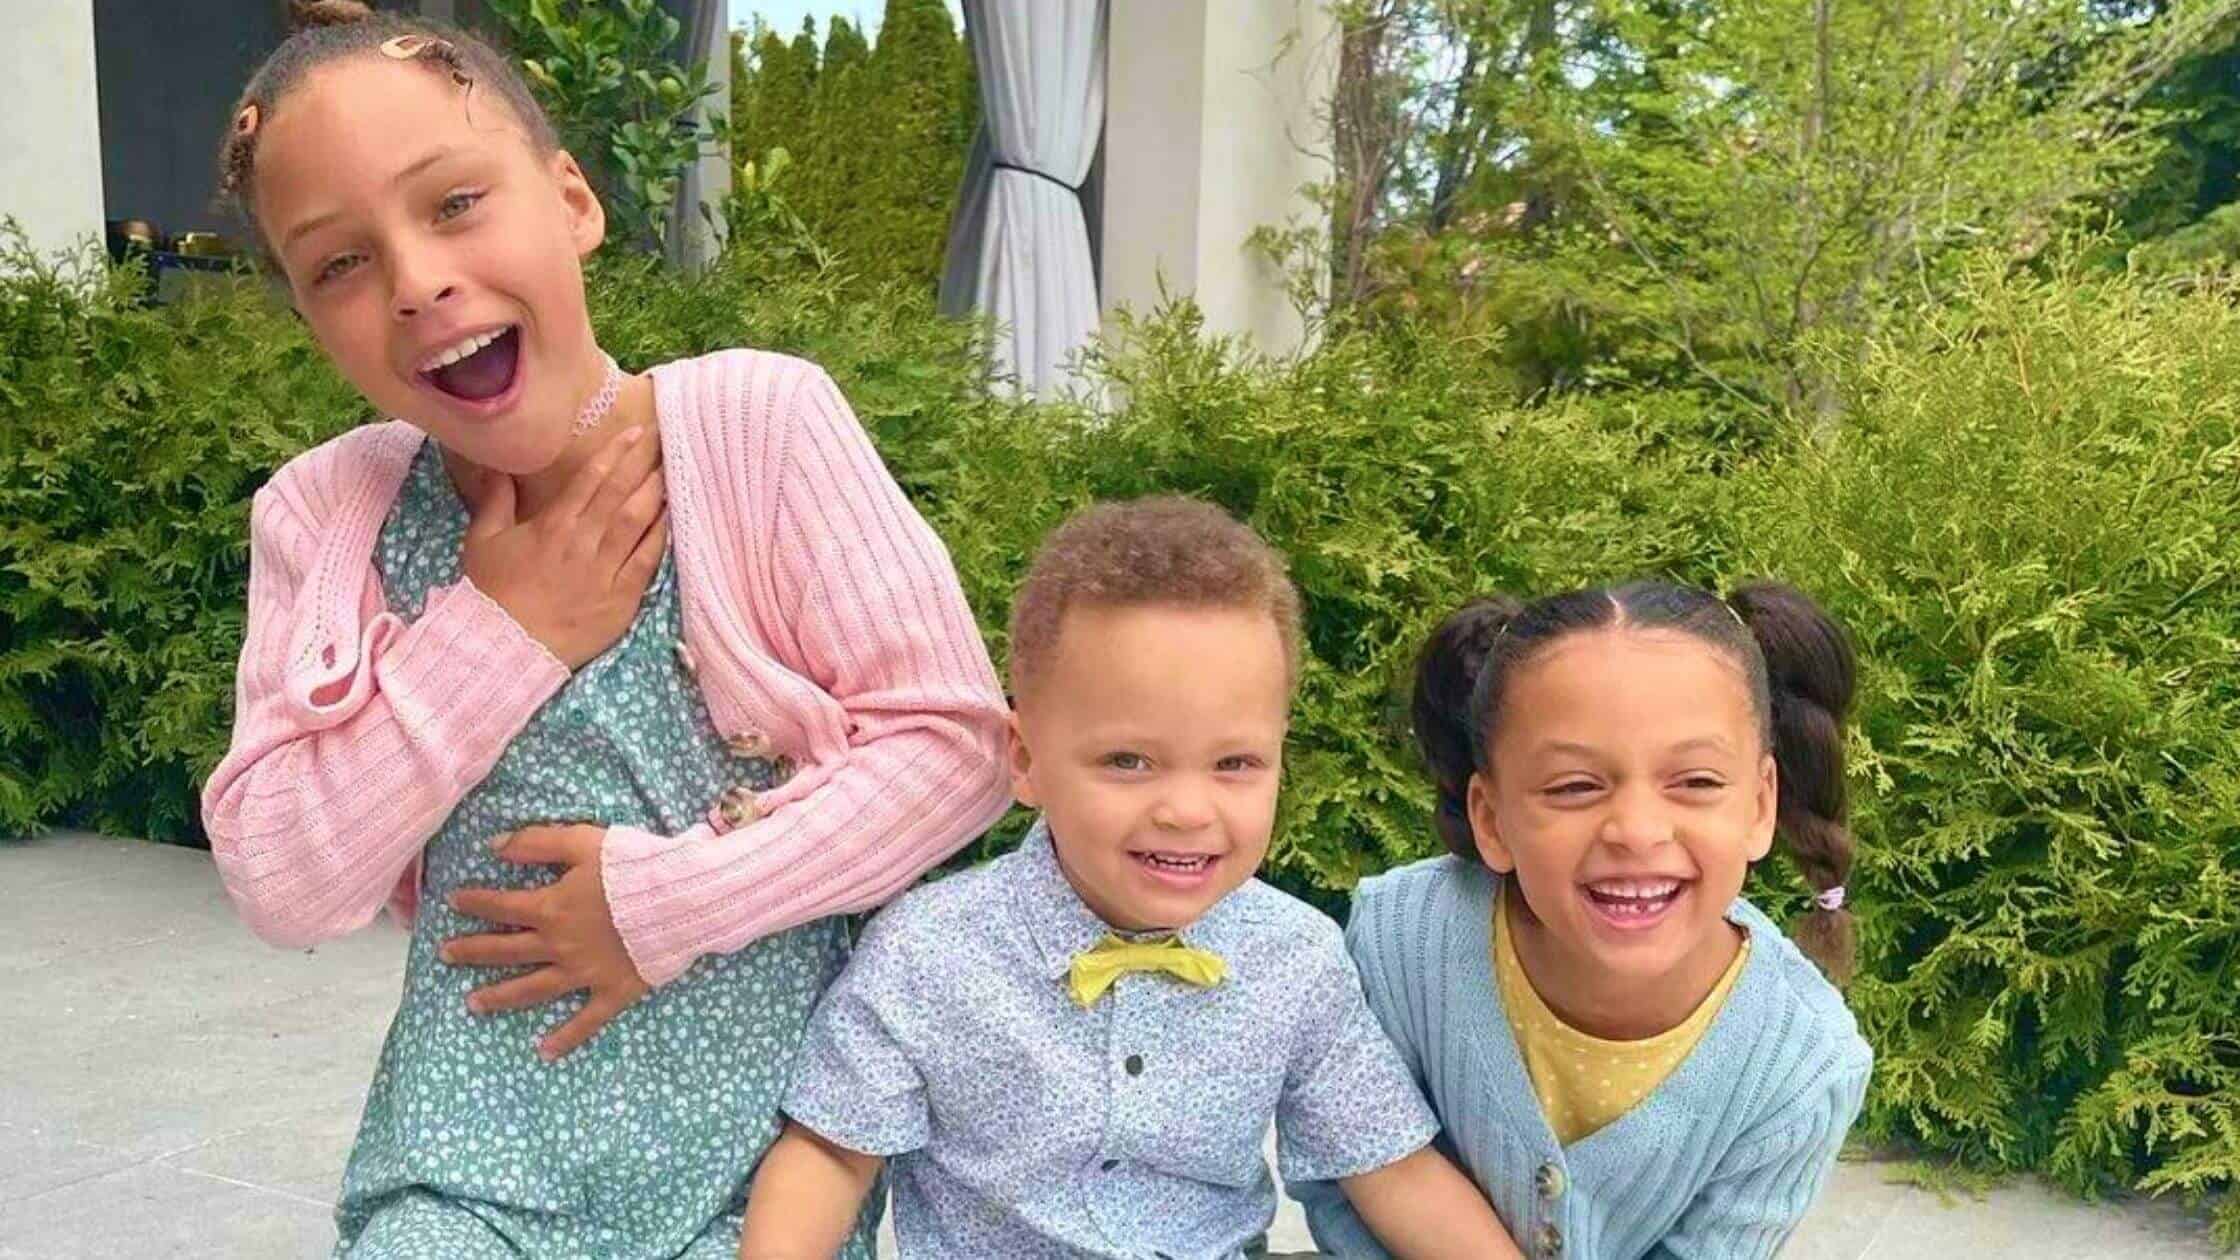 Steph Curry’s Kids How Old Is Steph Curry's Daughter